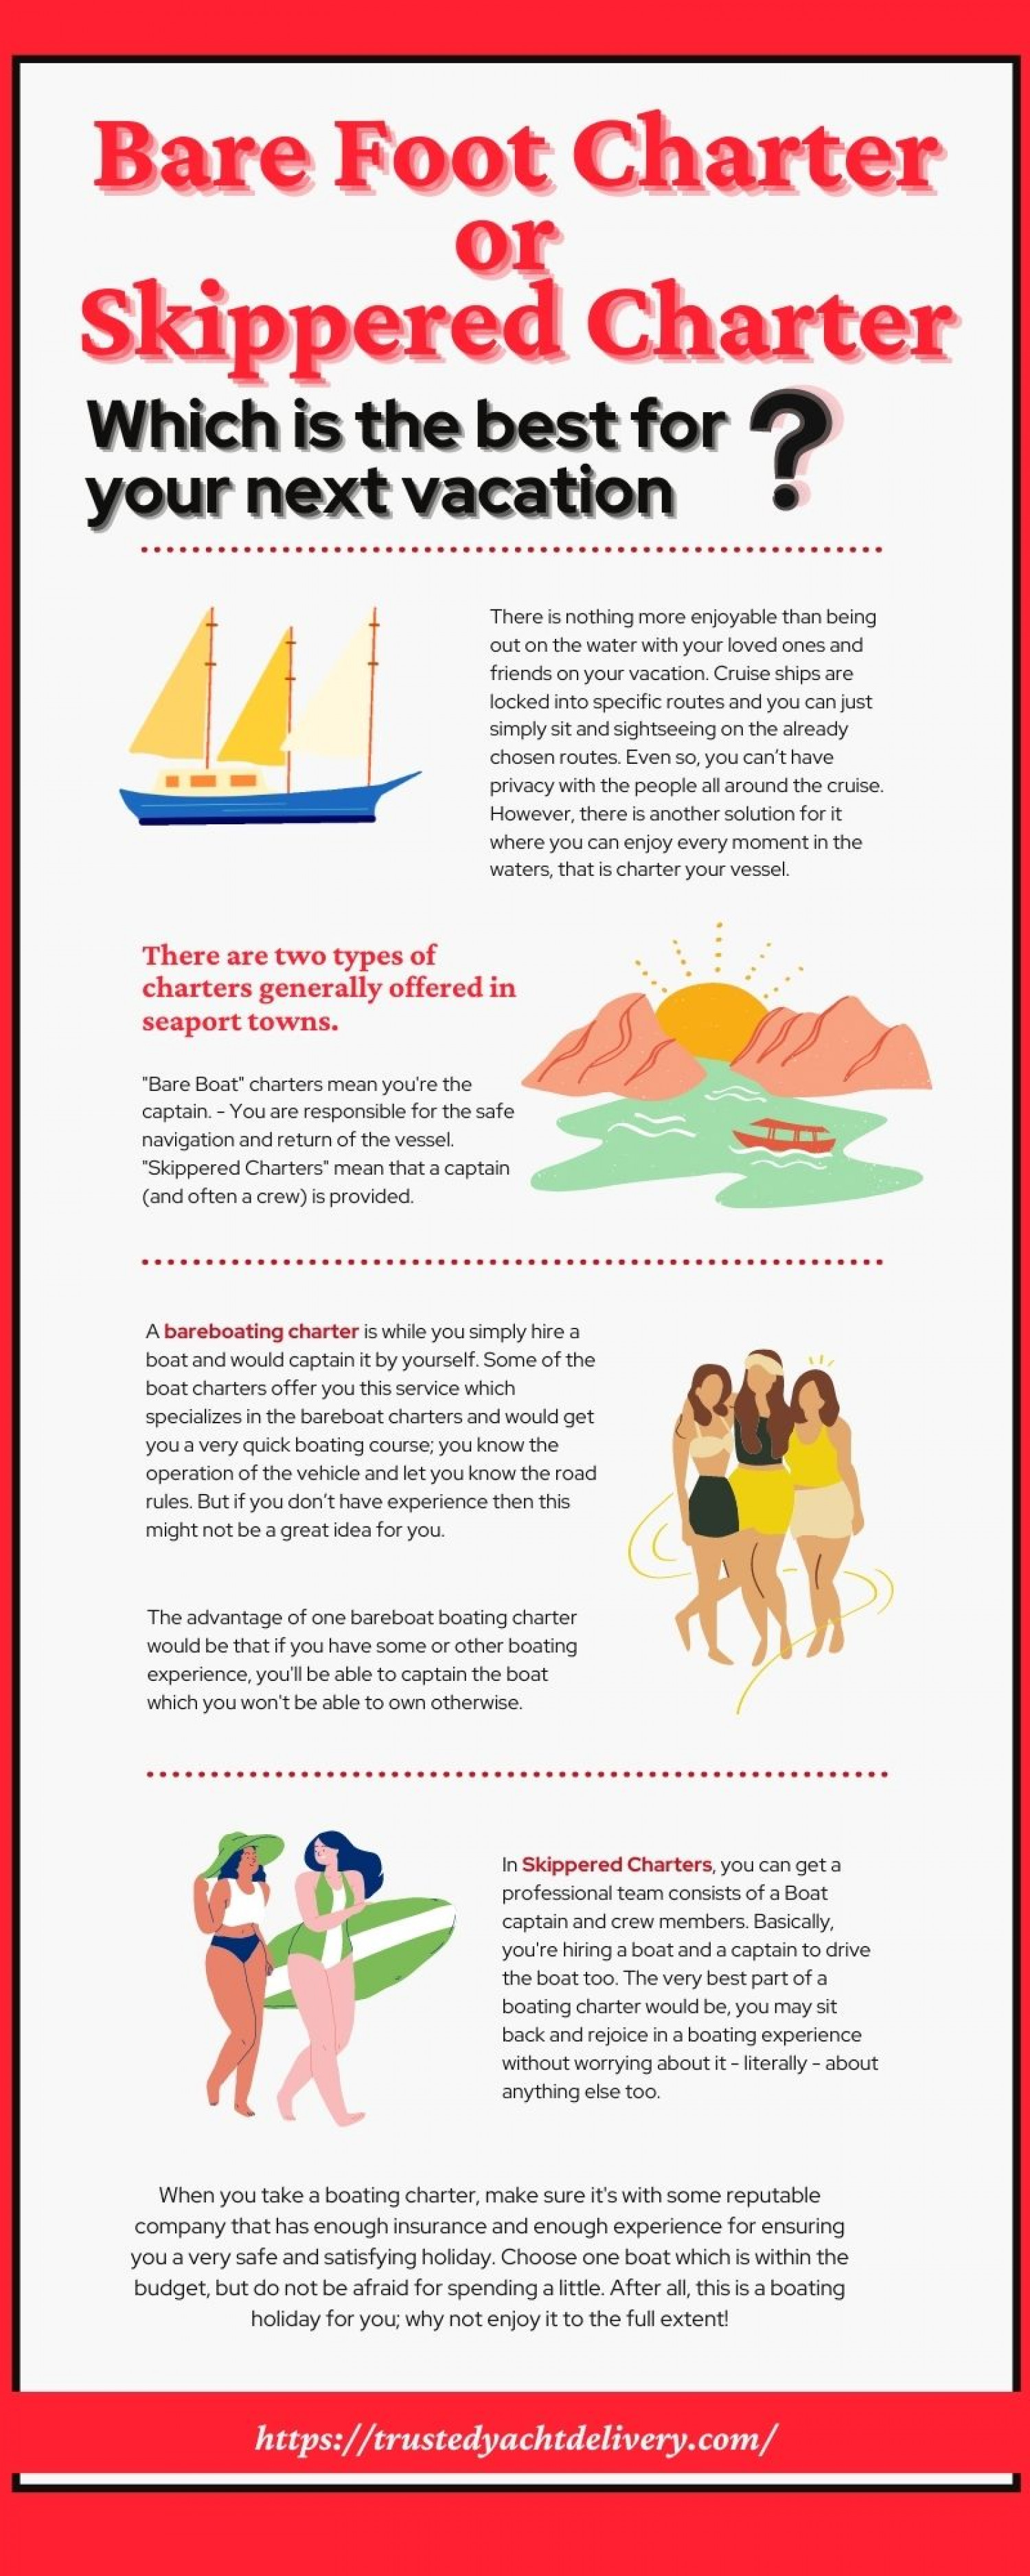 Bare Foot Charter or Skippered Charter – Which is the best for your next vacation Infographic